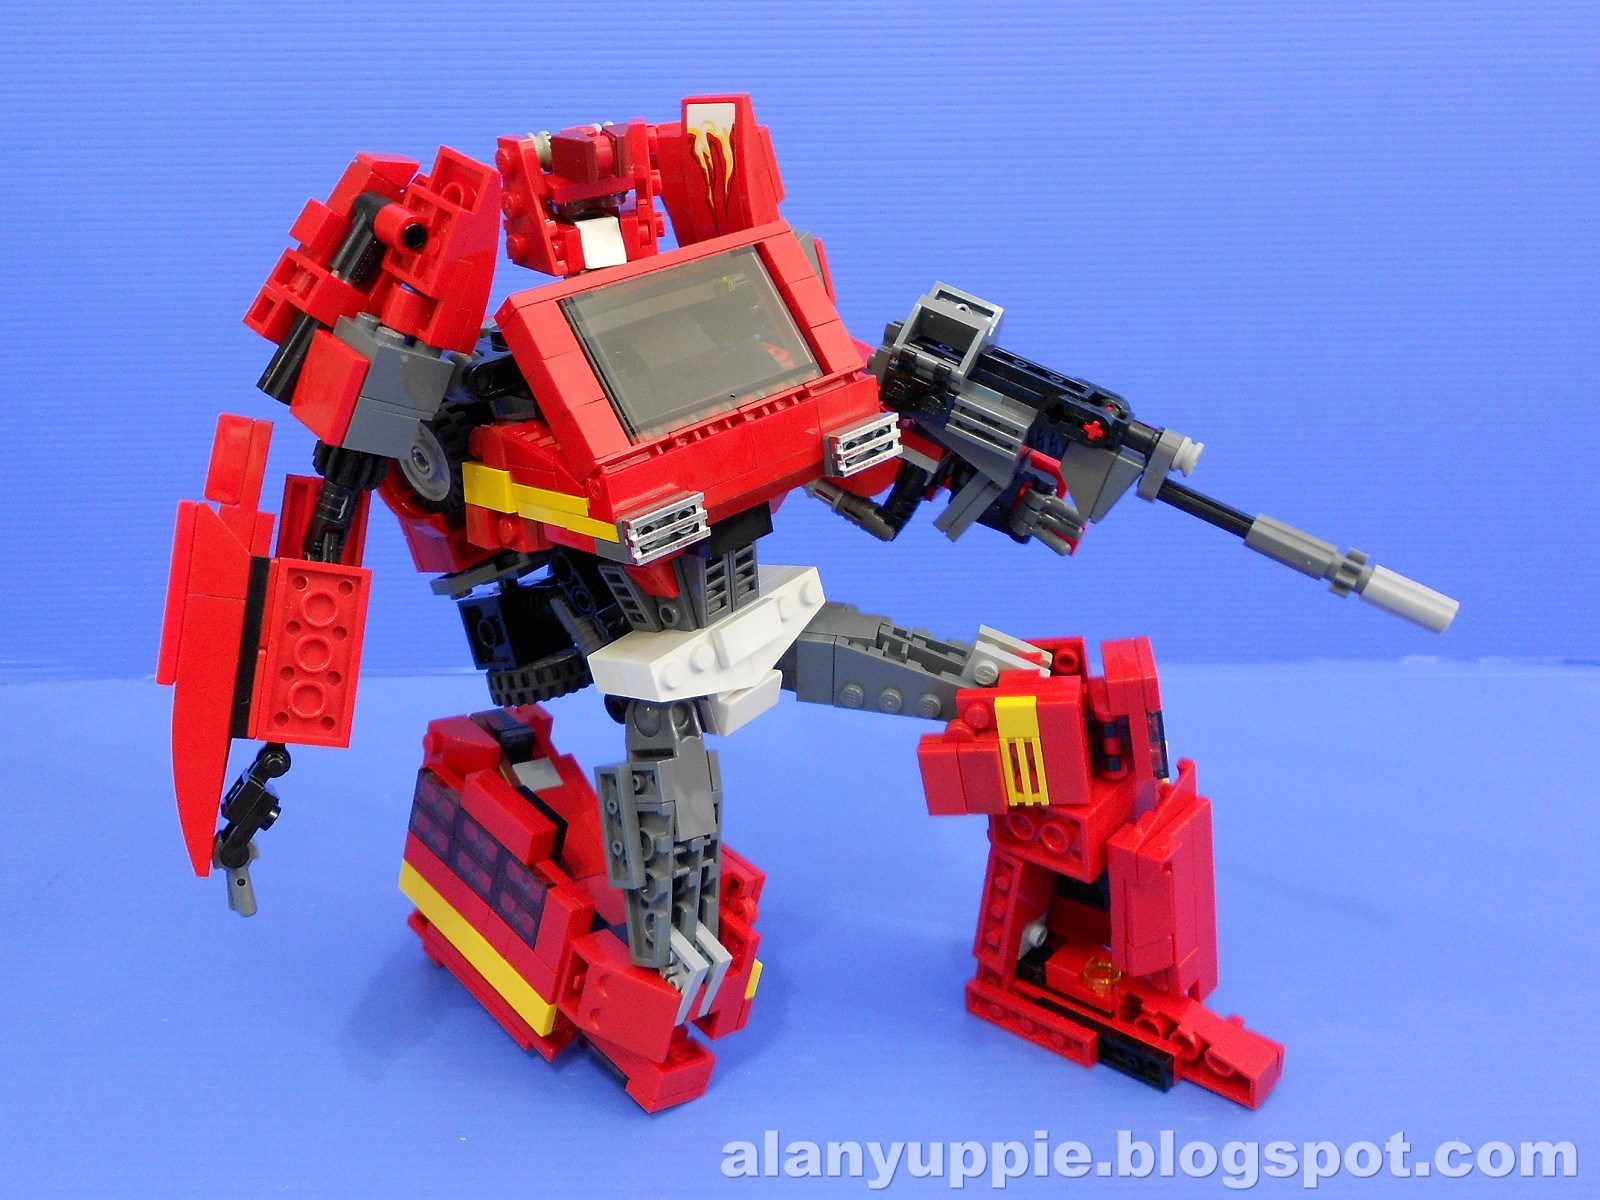 Alanyuppie's LEGO Transformers: Ironhide and Ratchet - Bot Modes